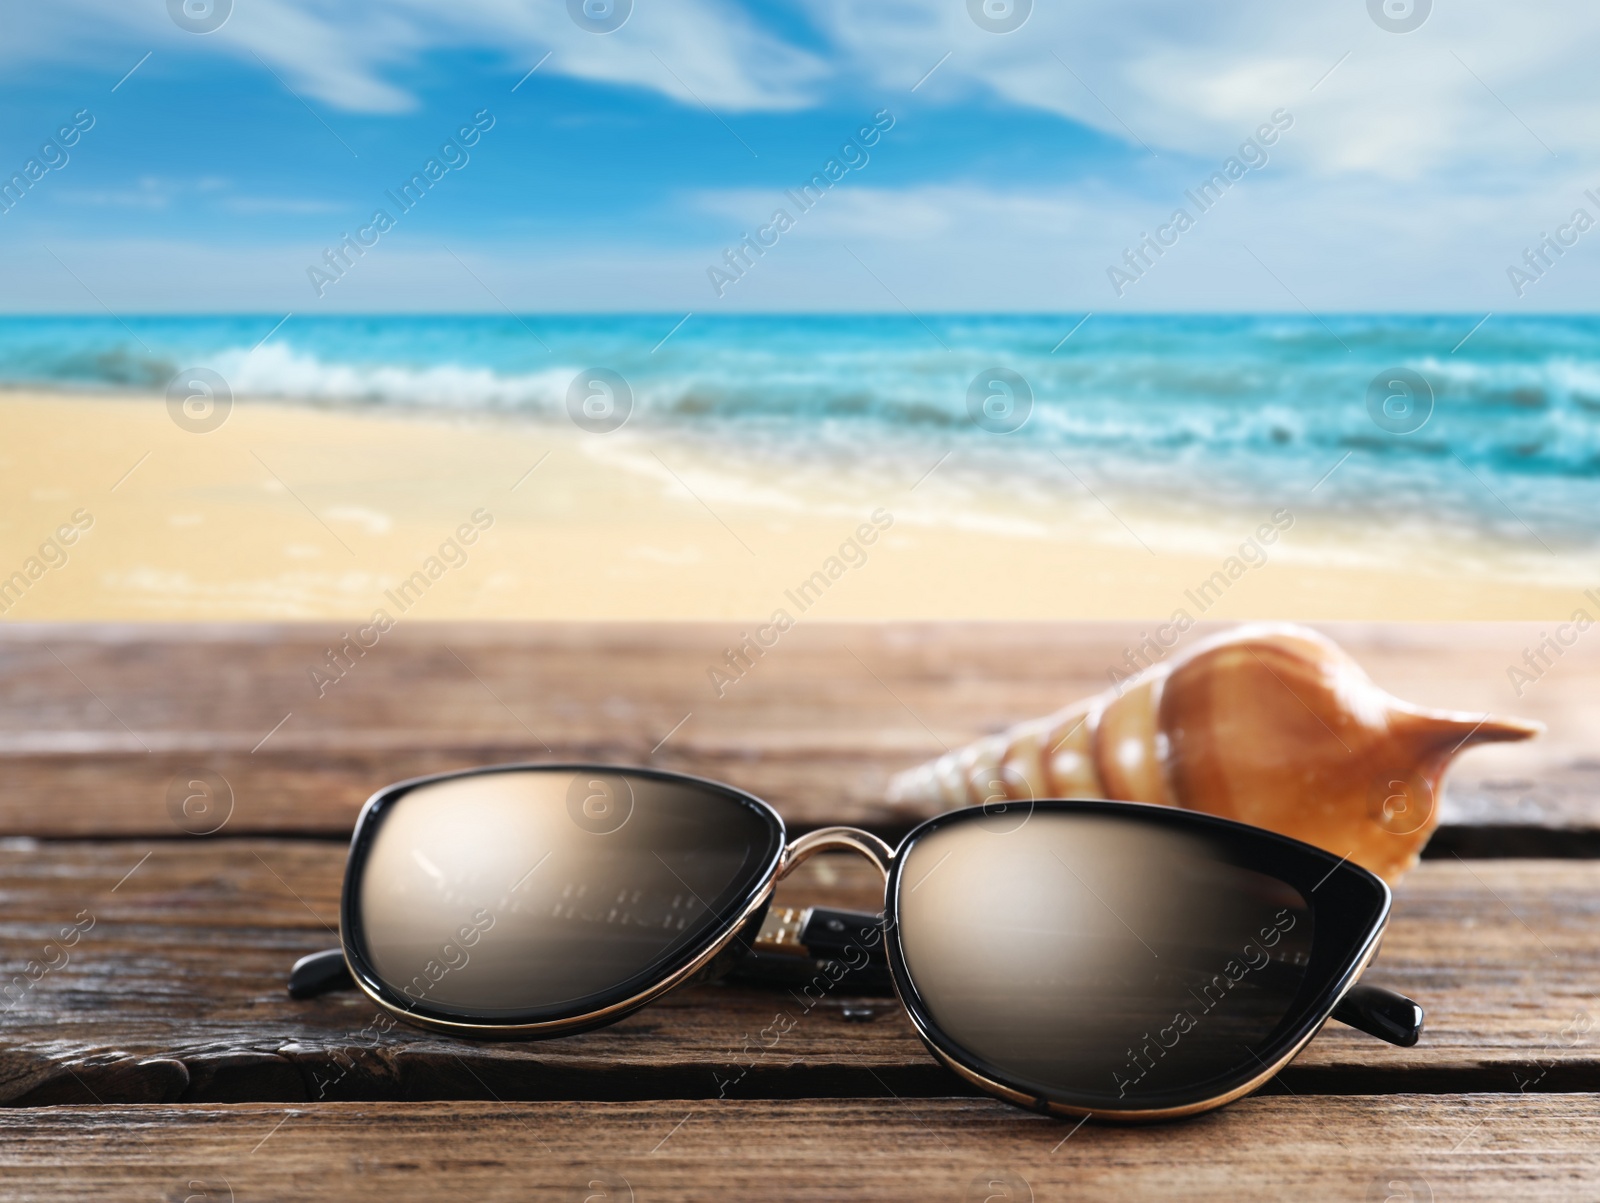 Image of Shell and stylish sunglasses on wooden table near sea with sandy beach